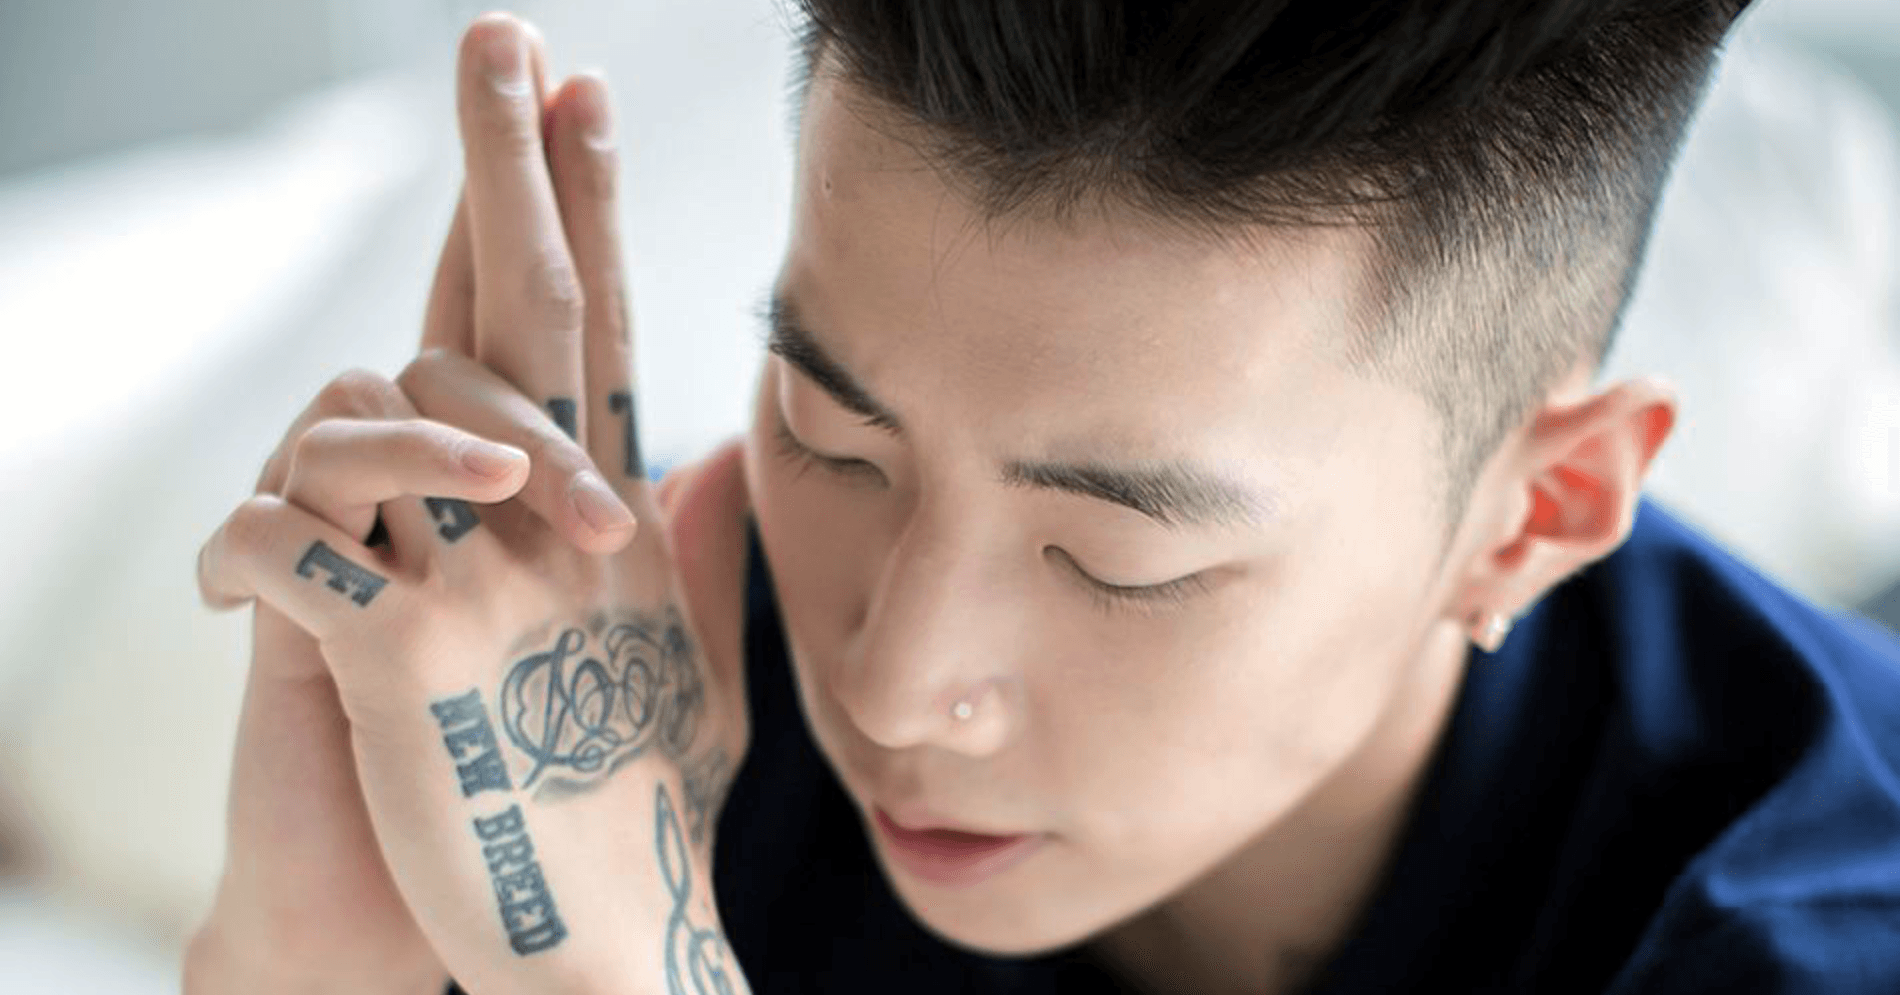 The Deeper Meaning Behind These 7 Celebrity Tattoos - Koreaboo